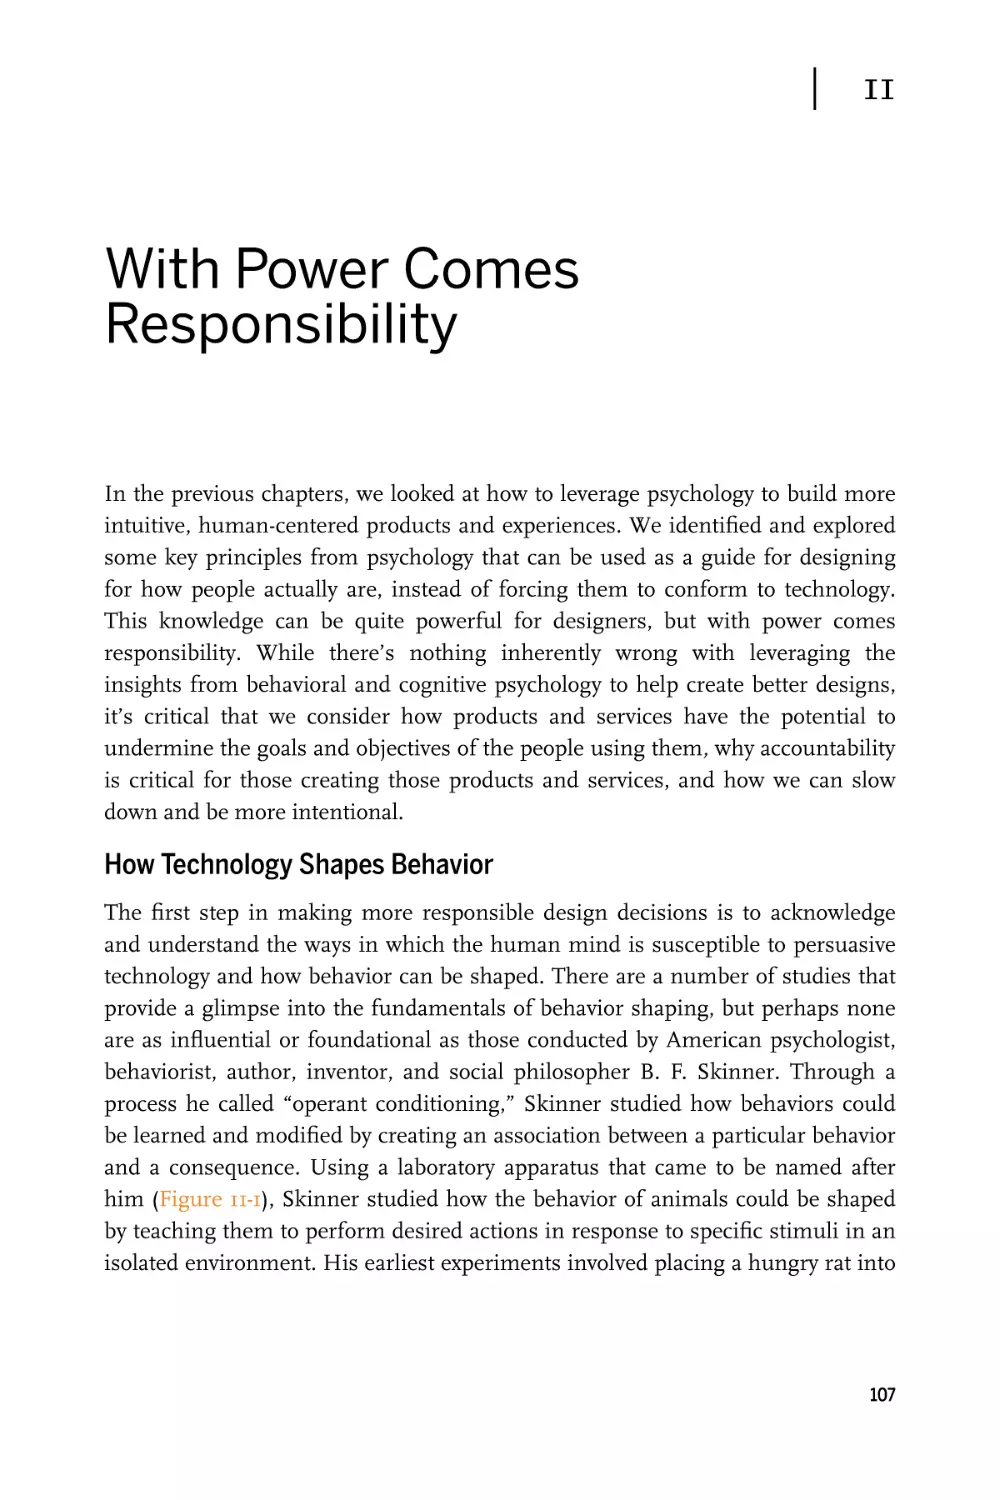 Chapter 11. With Power Comes Responsibility
How Technology Shapes Behavior